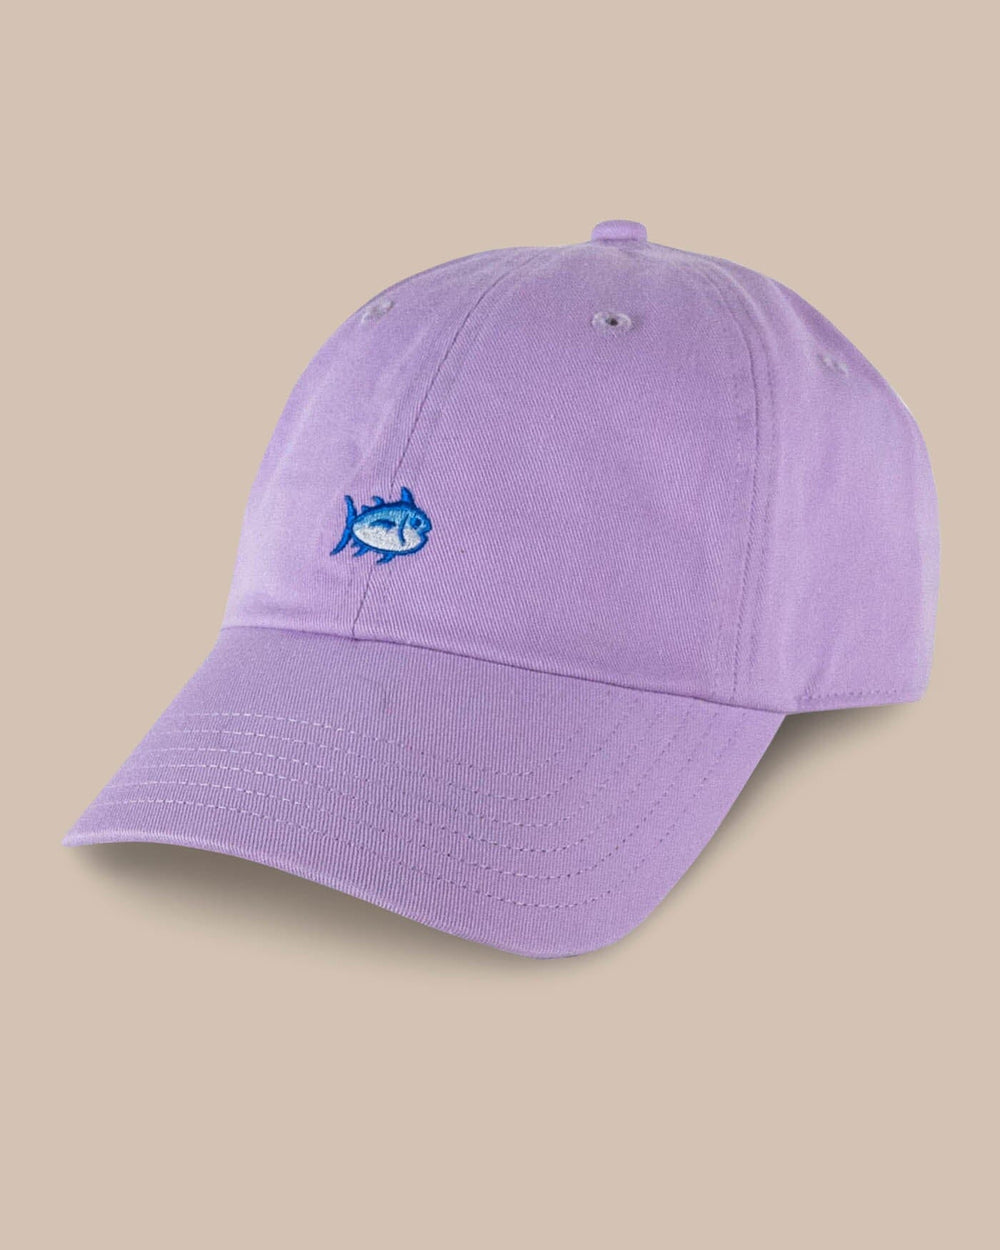 The front view of the Southern Tide Mini Skipjack Leather Strap Hat by Southern Tide - Lavender